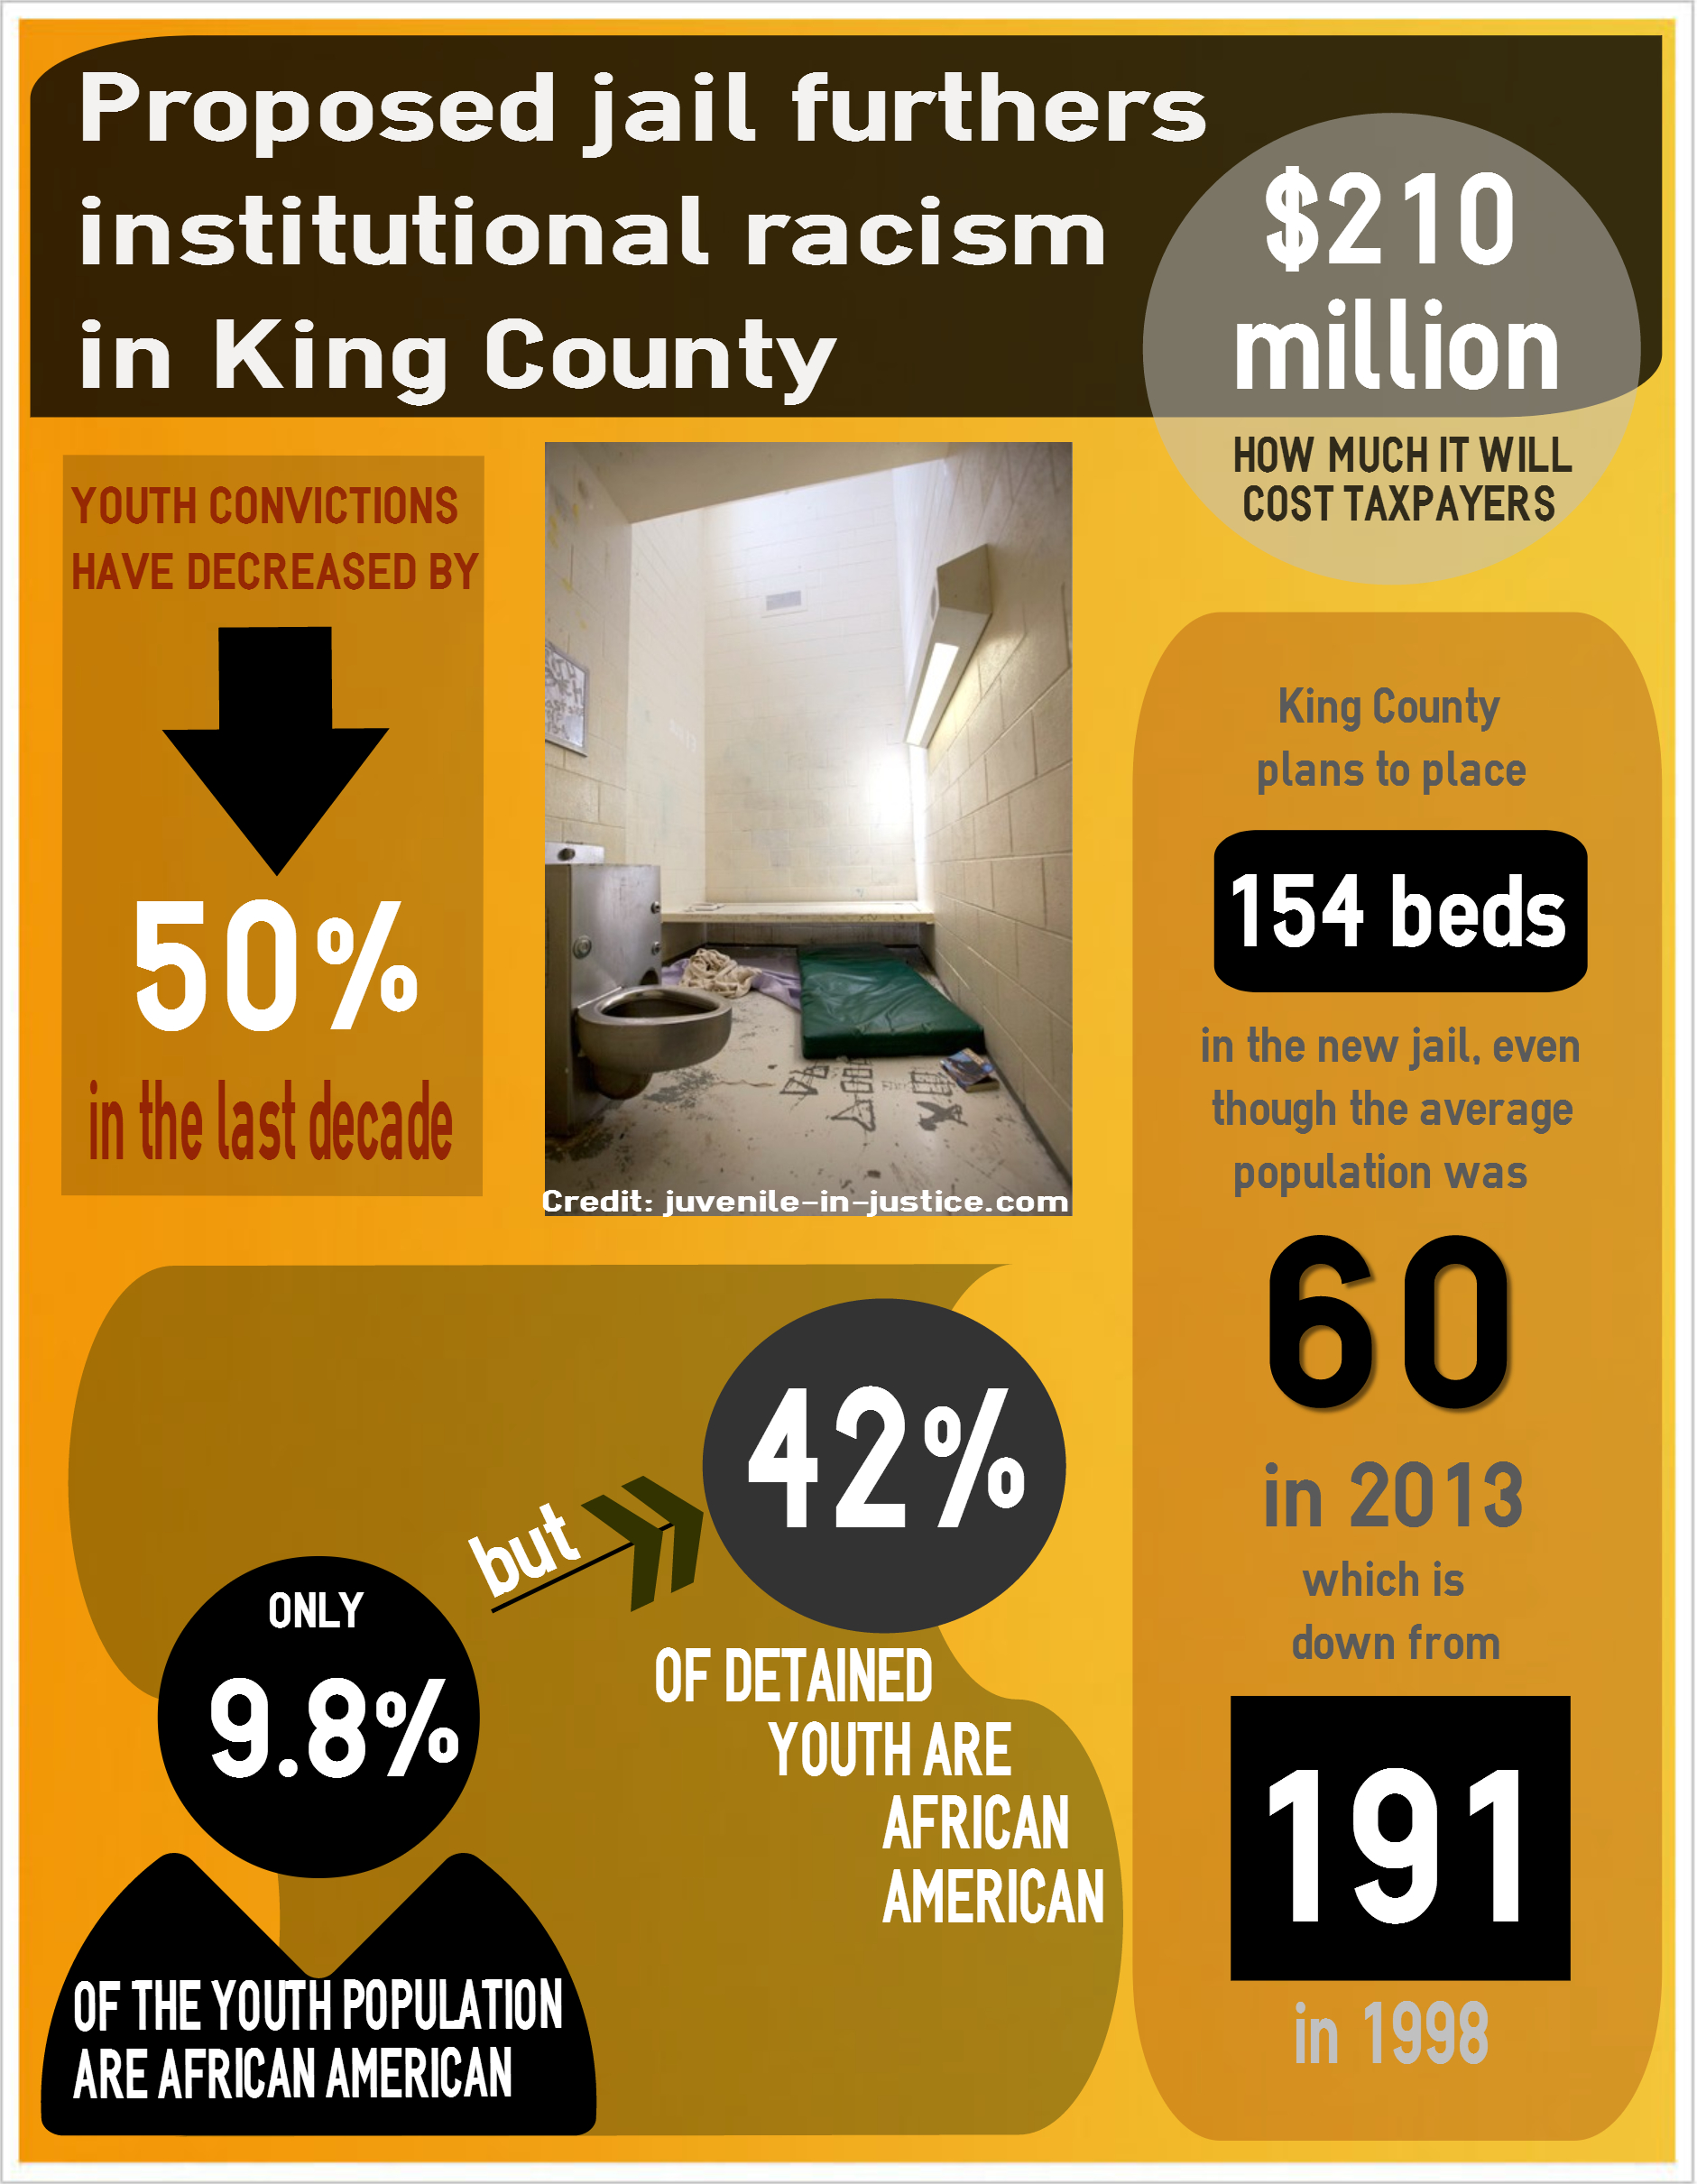 New Youth Jail, King County, institutional racism, african american incarceration, king county juvenile infographic